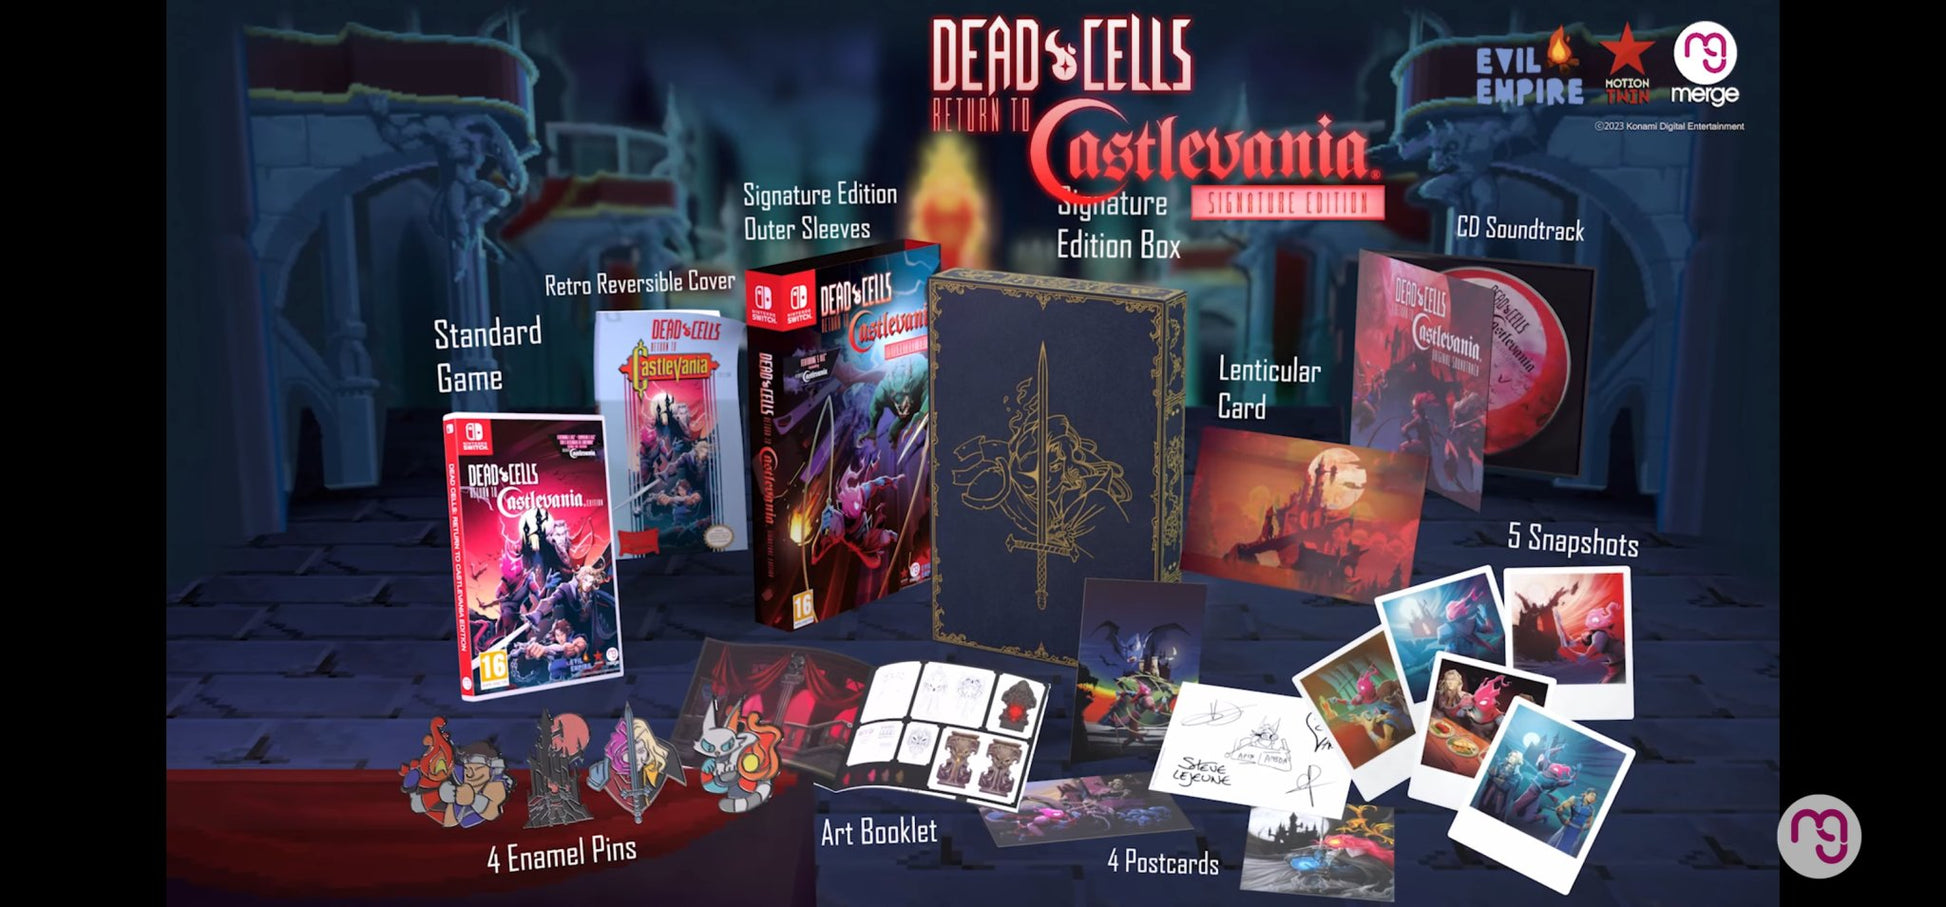 DEAD CELLS RETURN TO CASTLEVANIA LIMITED SIGNATURE EDITION